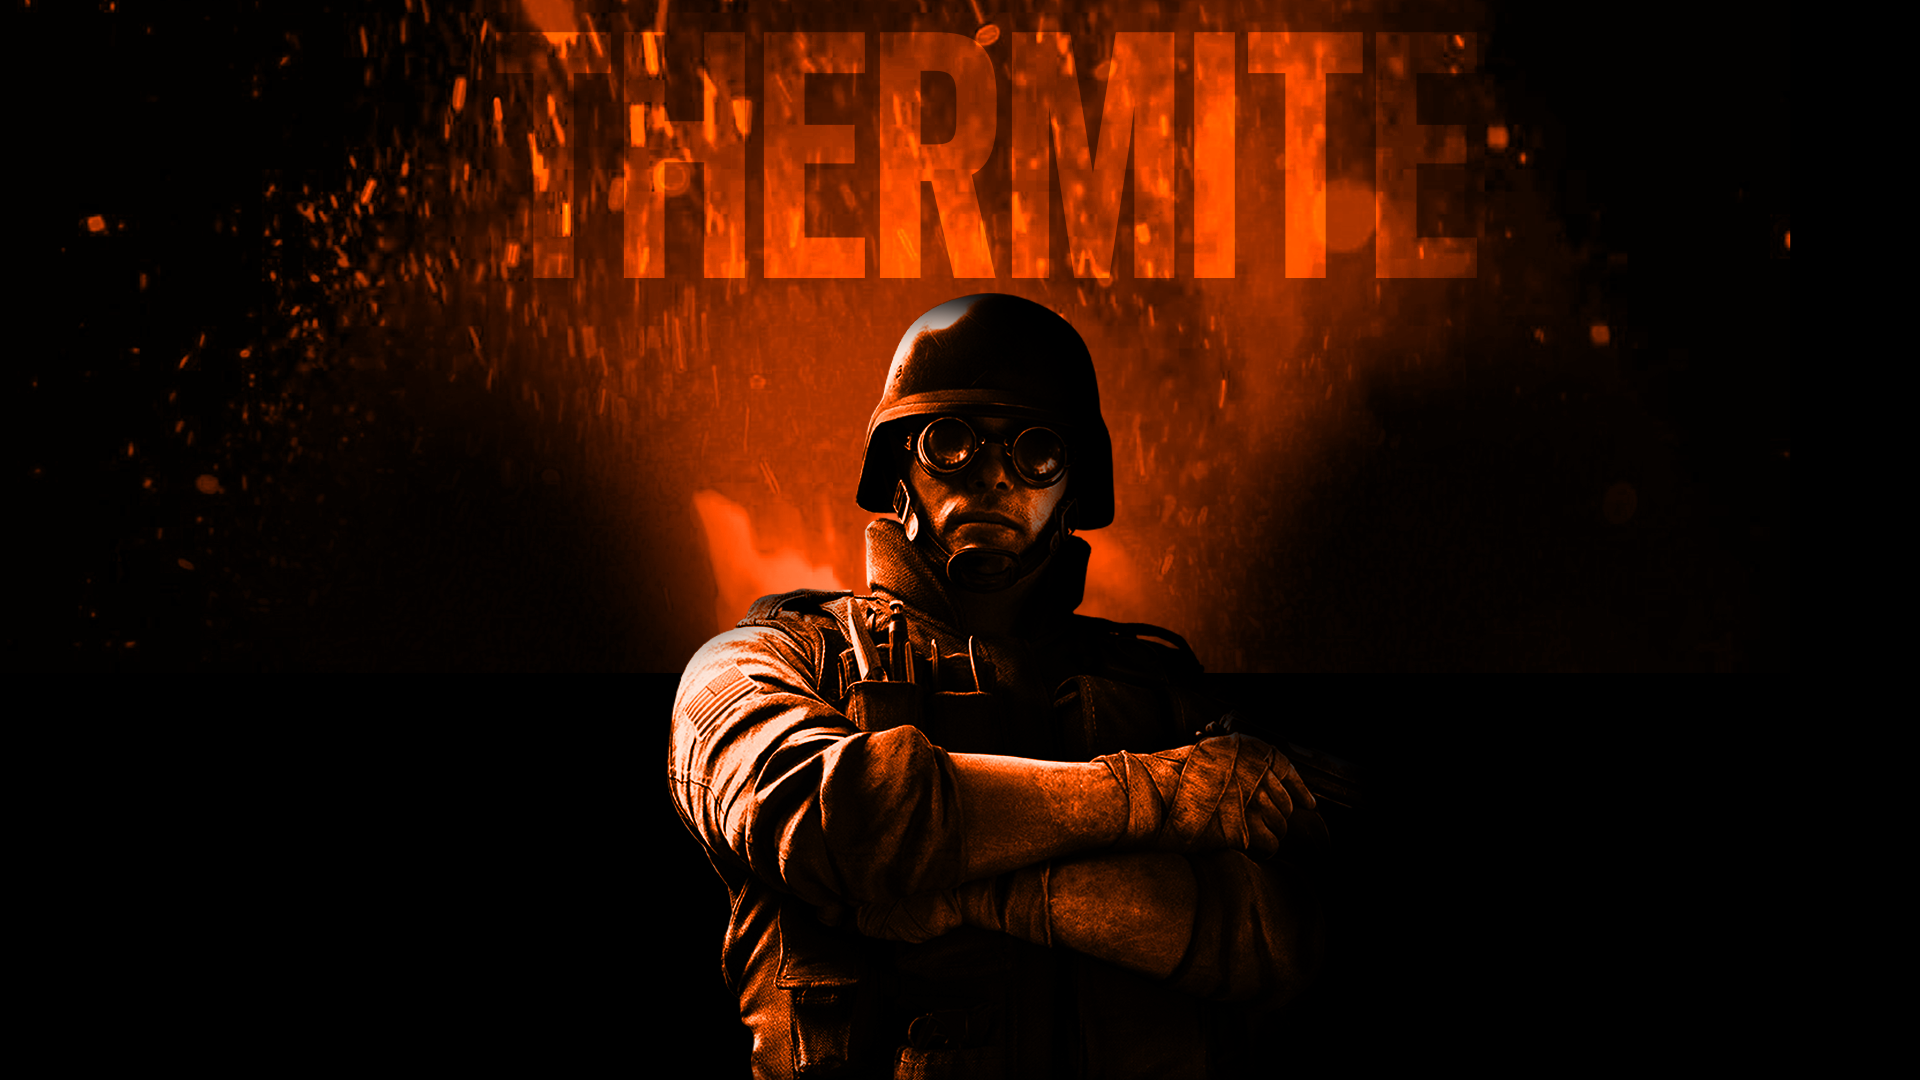 Thermite Night Wallpaper Need iPhone 6s Plus